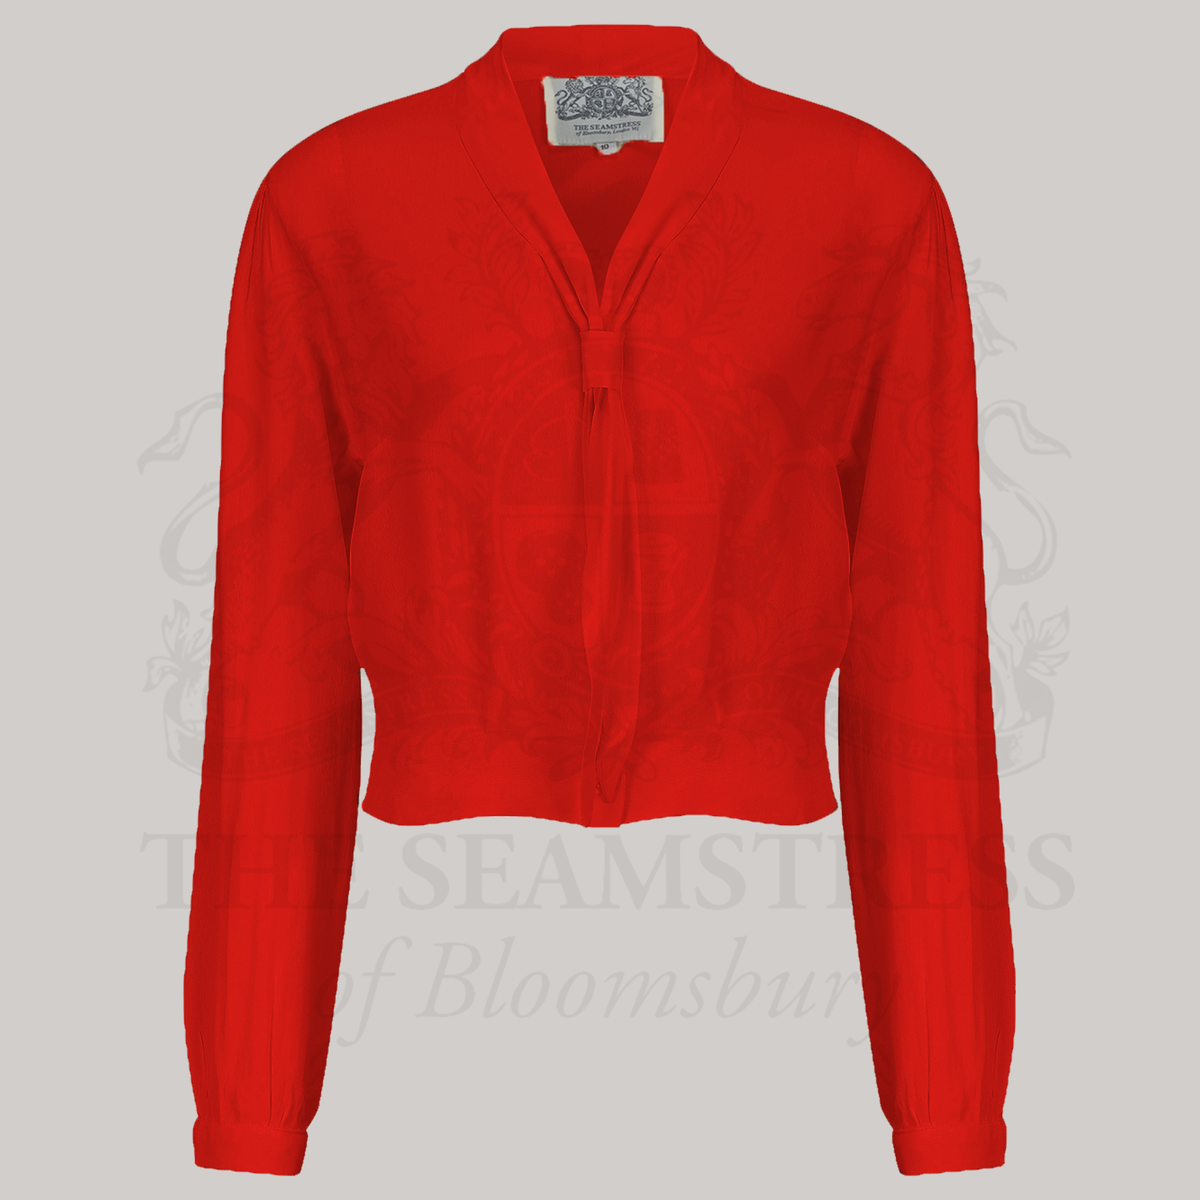 A 1940s sailor style blouse with long sleeves in red. Featuring a roll style collar to give the iconic sailor look. Small buttons run down the front of the blouse for fastening but are hidden by the long collar.